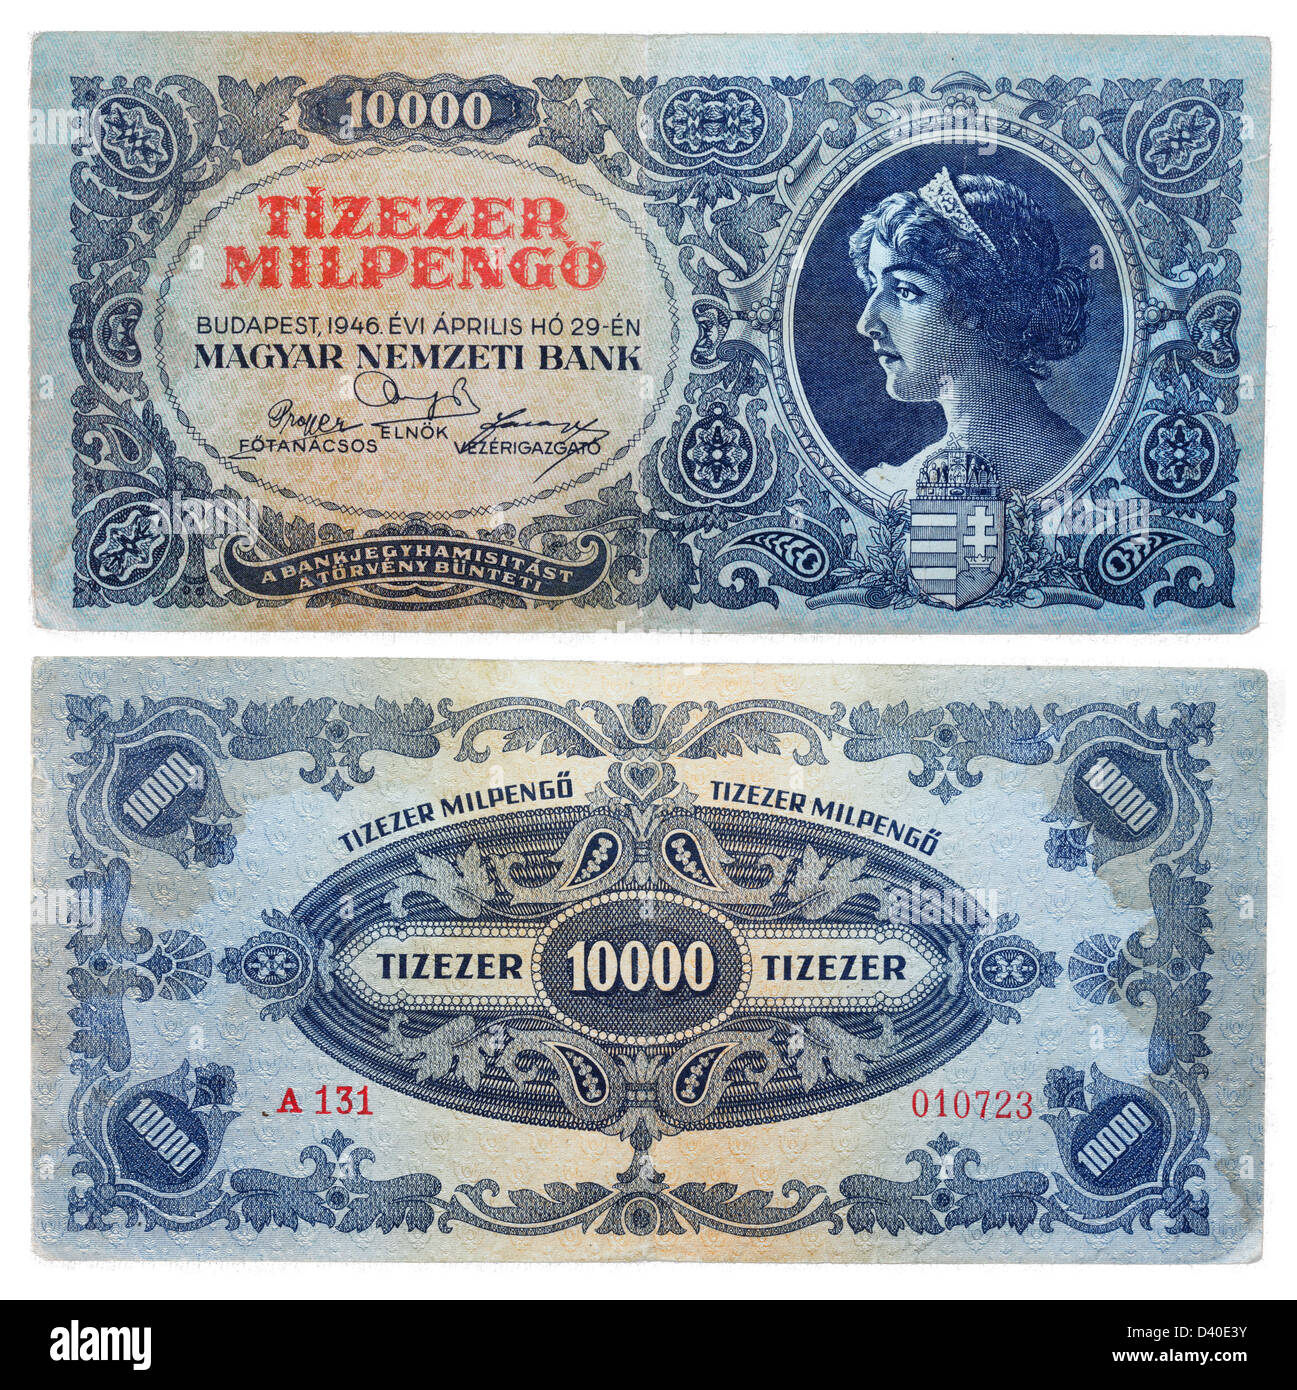 10000 Pengo banknote, Young woman, Hungary, 1946 Stock Photo